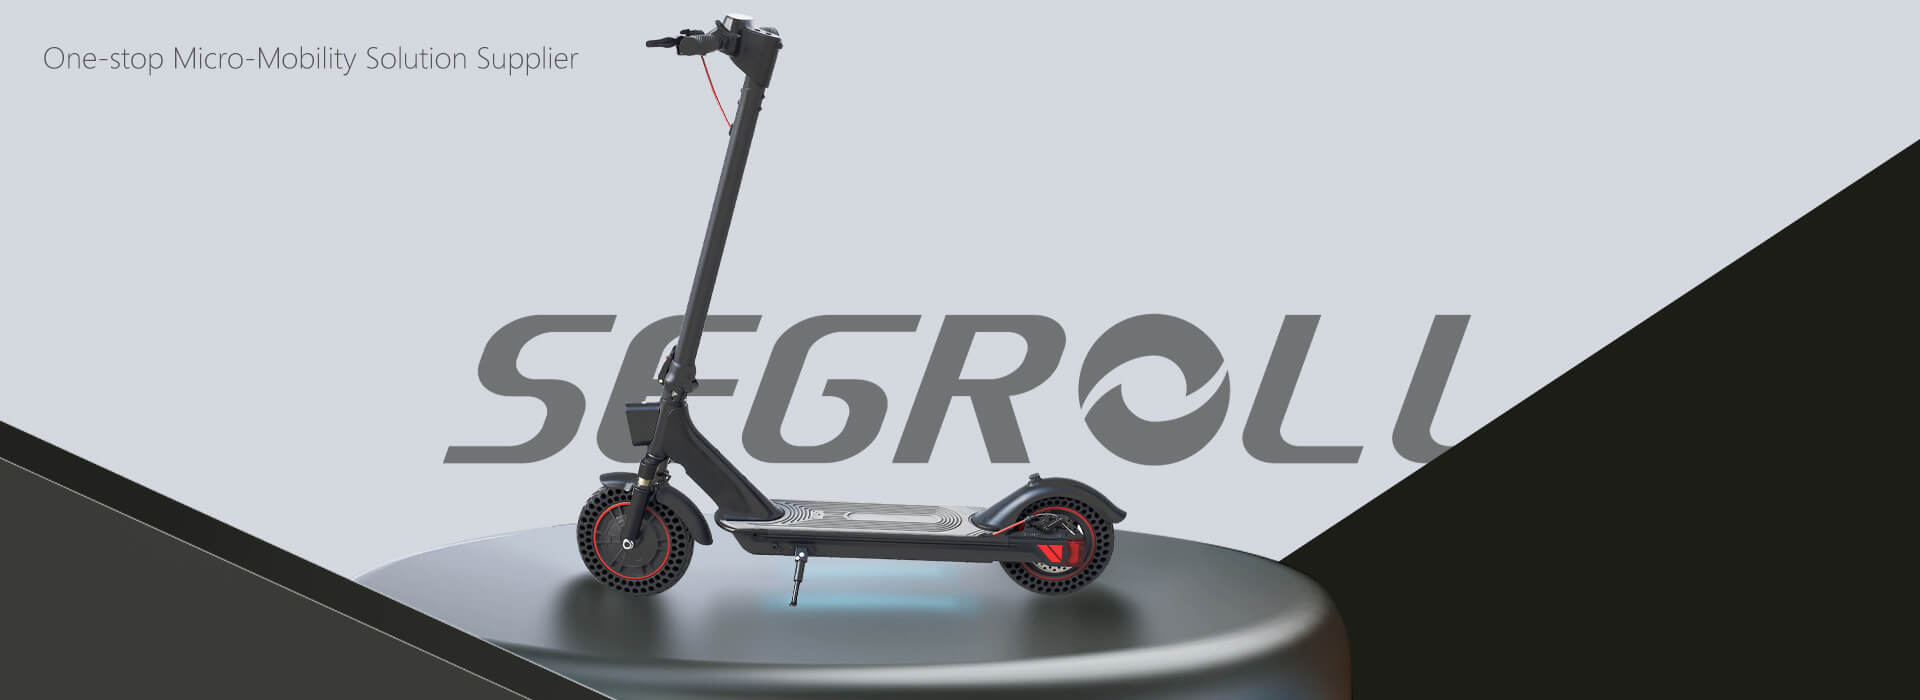  Segroll Foldable electric scooter facoter